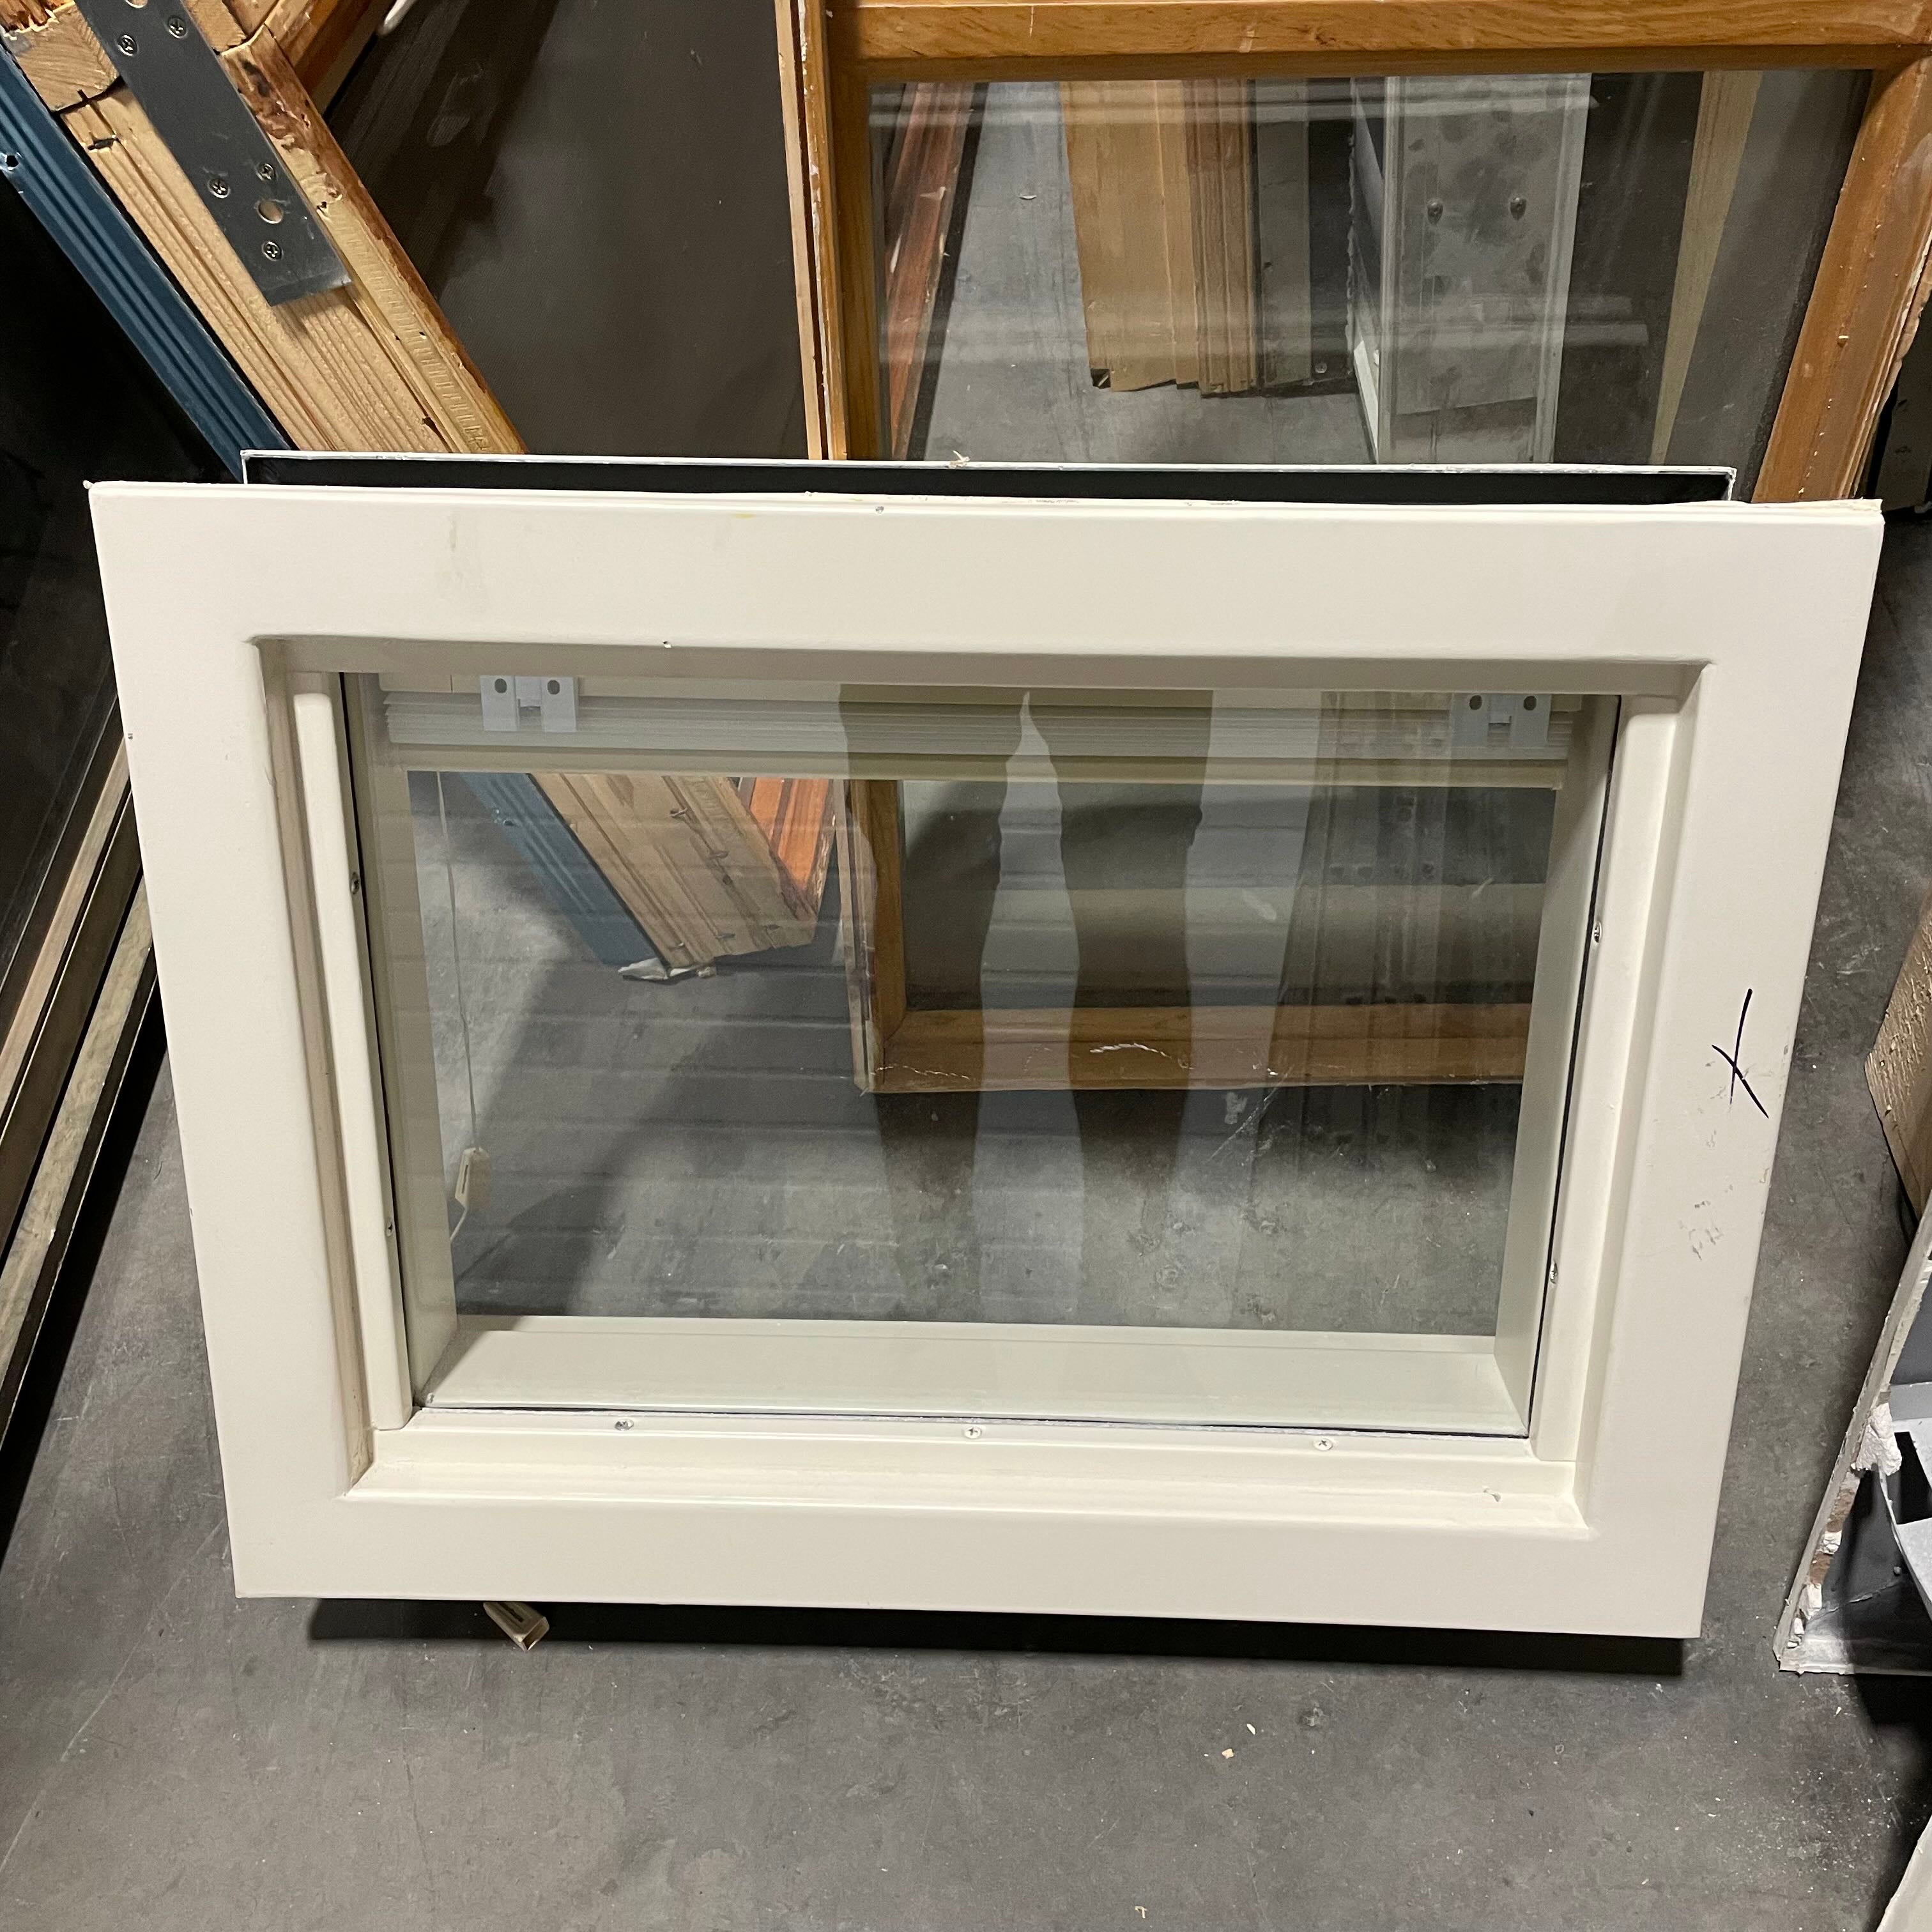 24"x 18"x 6.25" Painted White Metal Both Sides Fixed Exterior Window